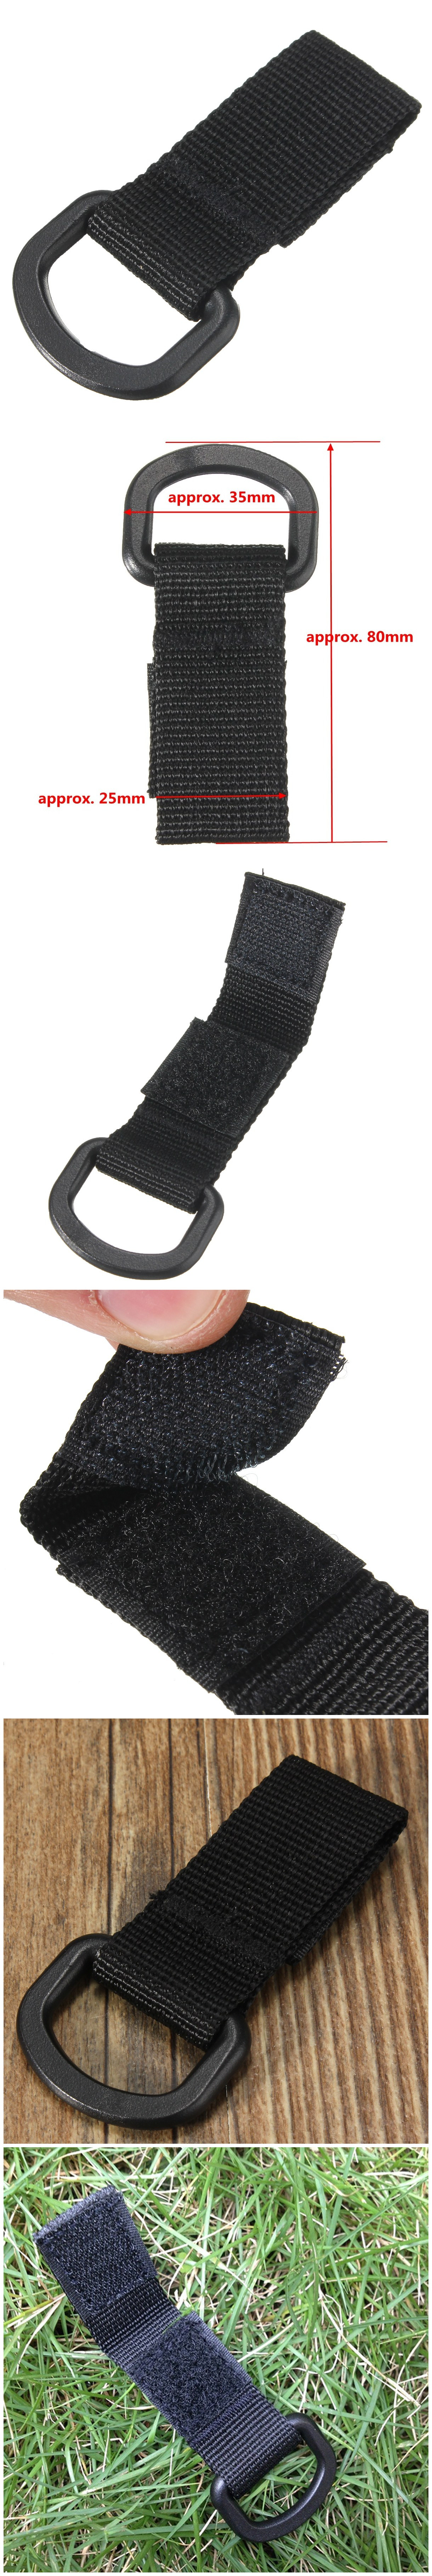 Military-Tactical-Carabiner-Nylon-Strap-Buckle-Hook-Belt-Hanging-Keychain-D-shaped-Ring-Molle-System-1028668-5